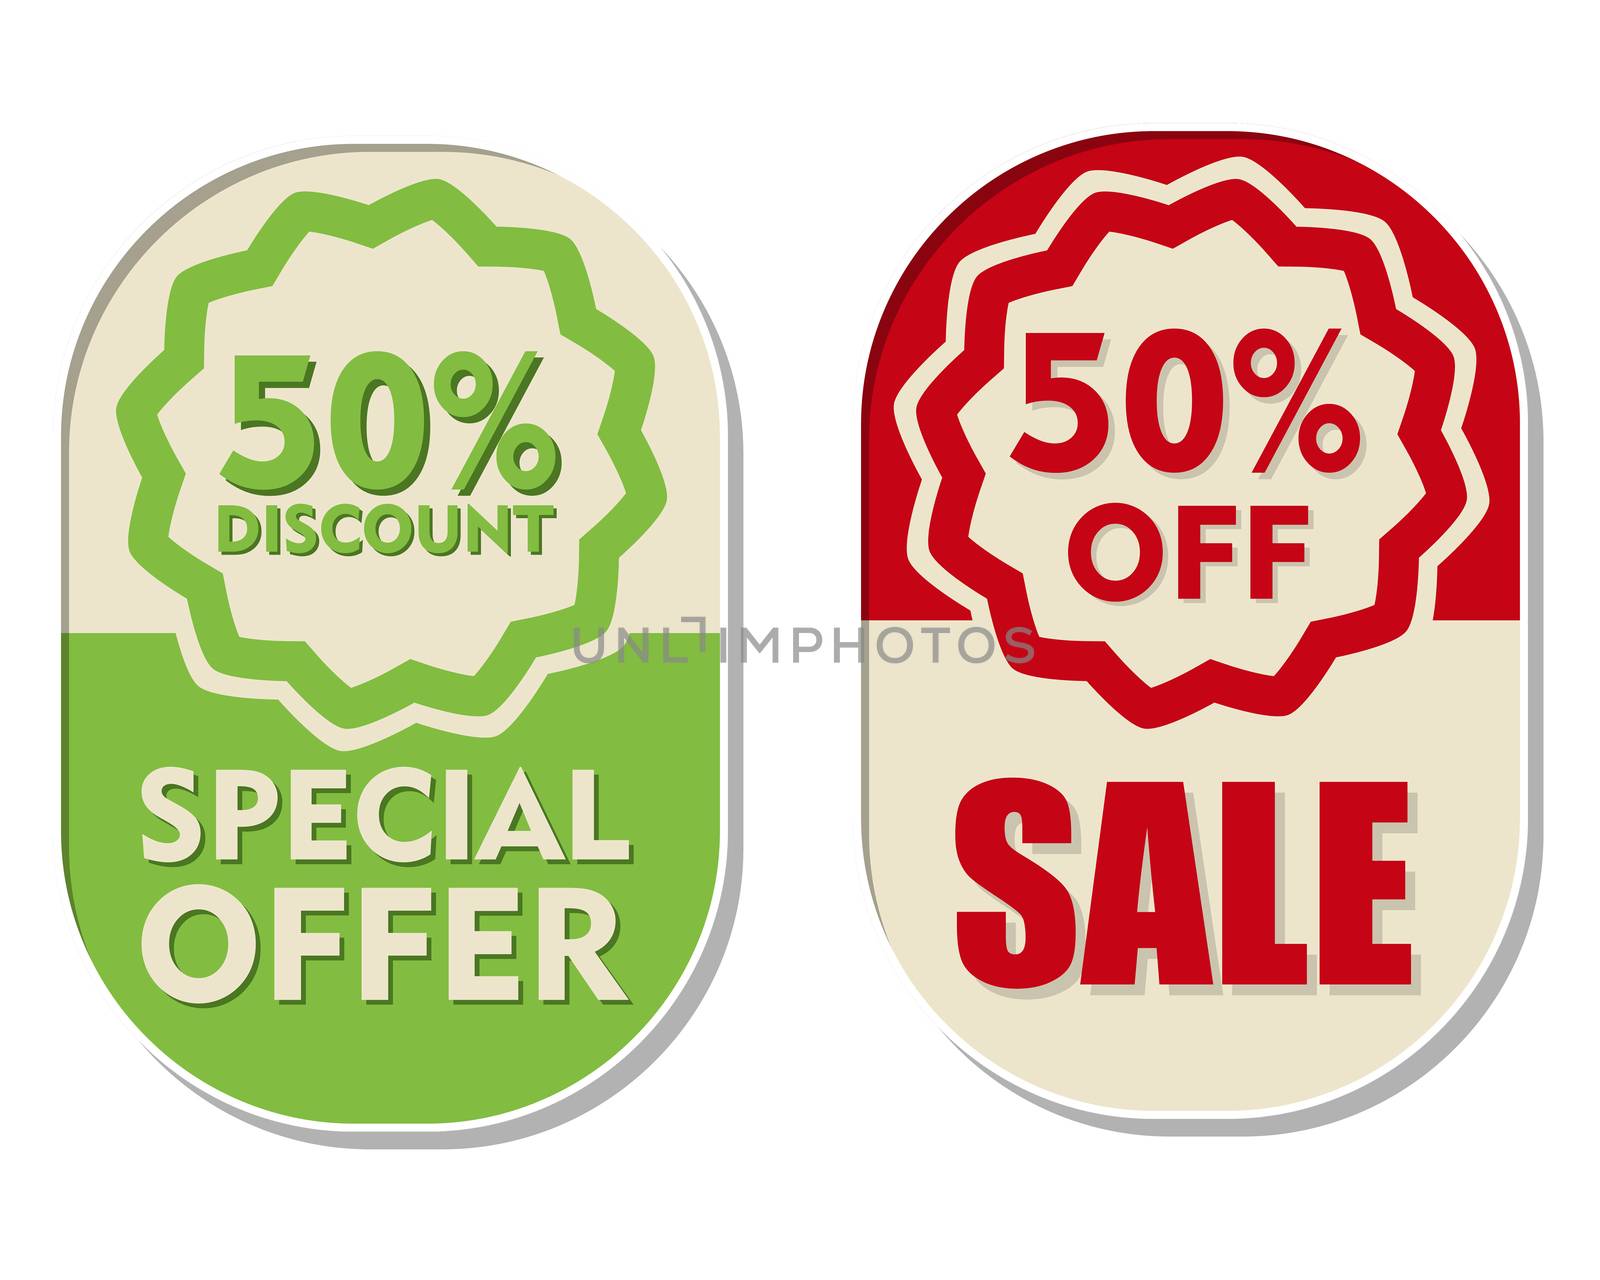 50 percent off discount, sale and special offer text banners, two elliptic flat design labels, business shopping concept